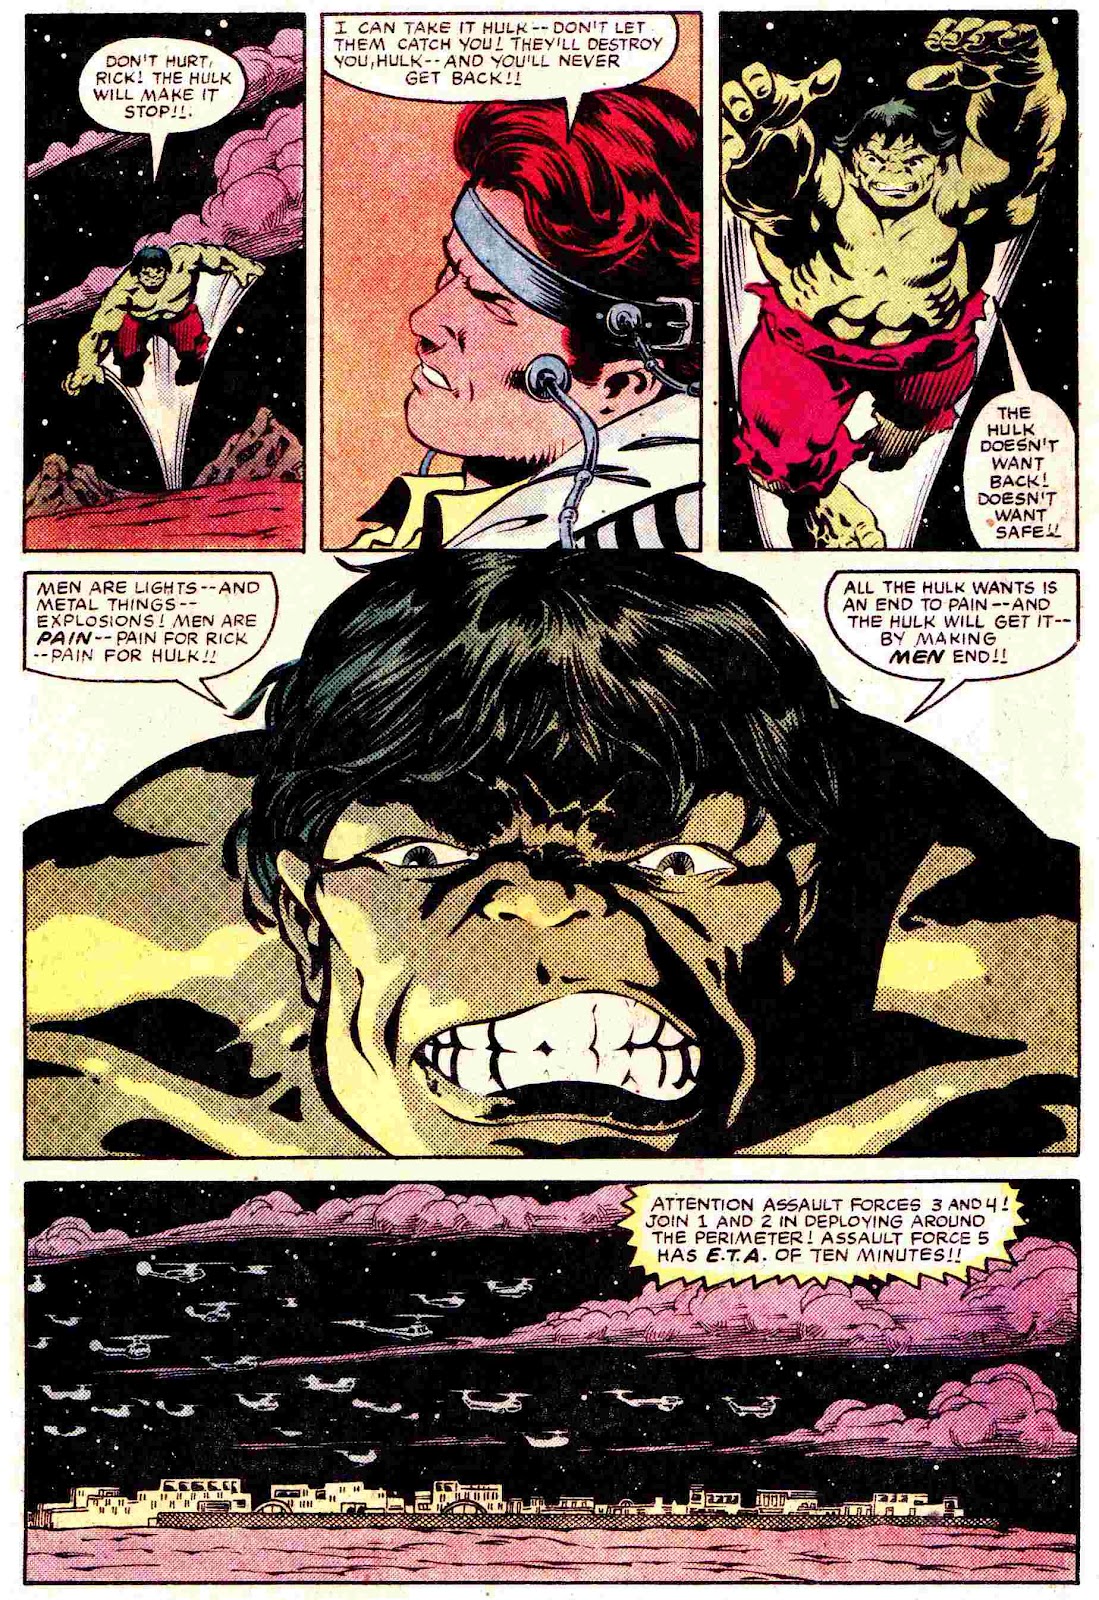 What If? (1977) issue 45 - The Hulk went Berserk - Page 18